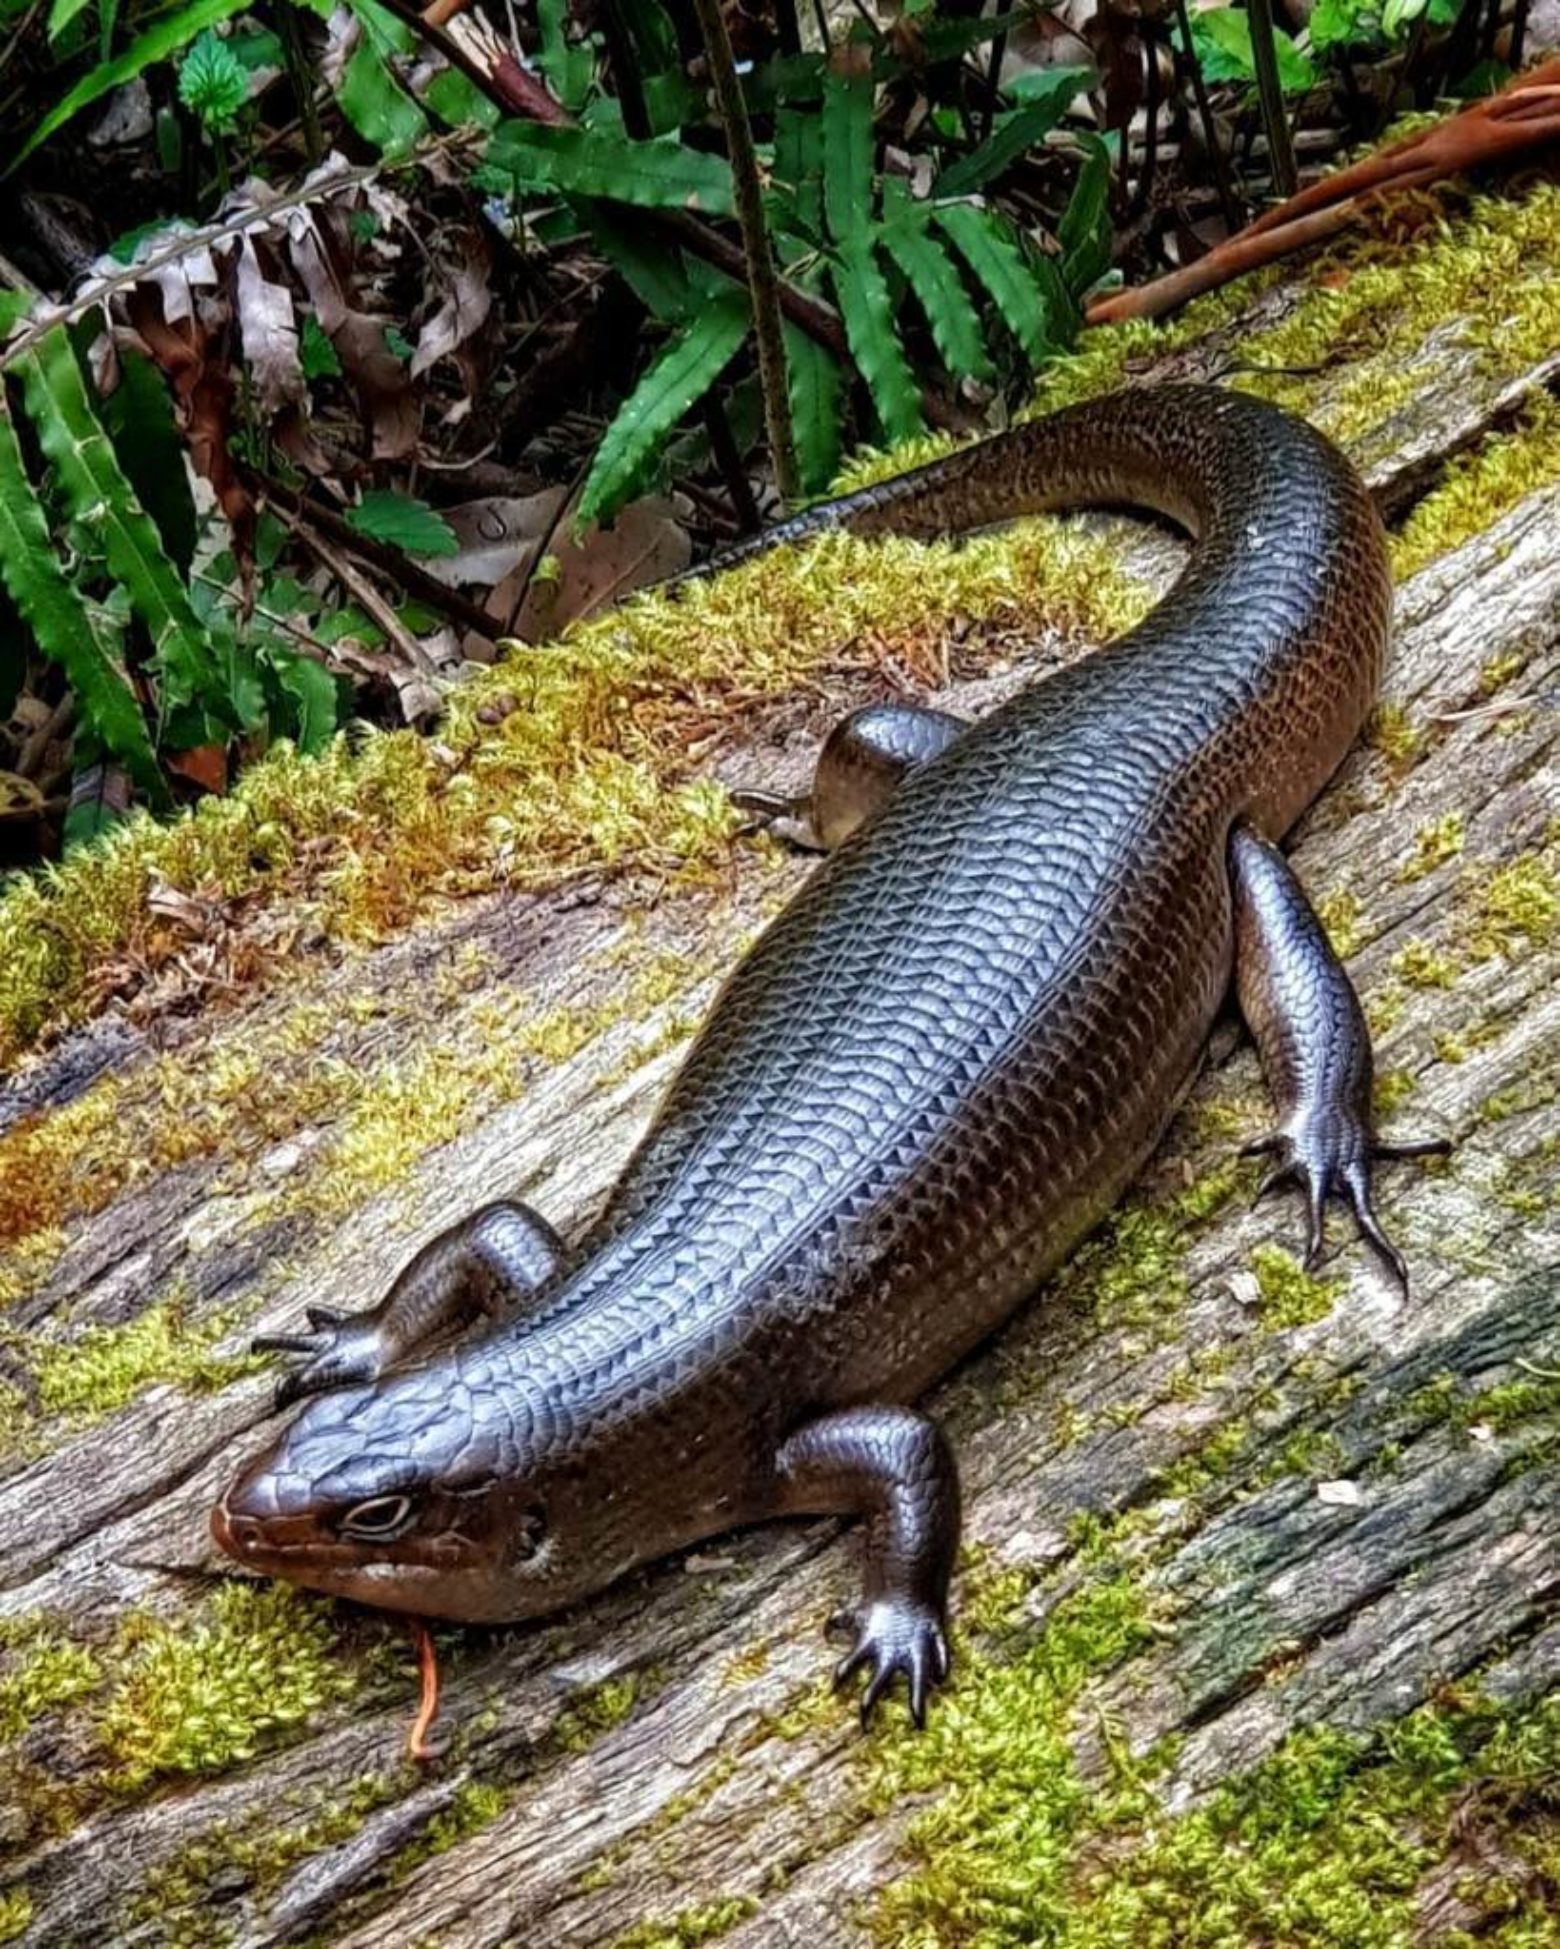 Land mullet in Barrington Tops (photo by @warrennoronha)